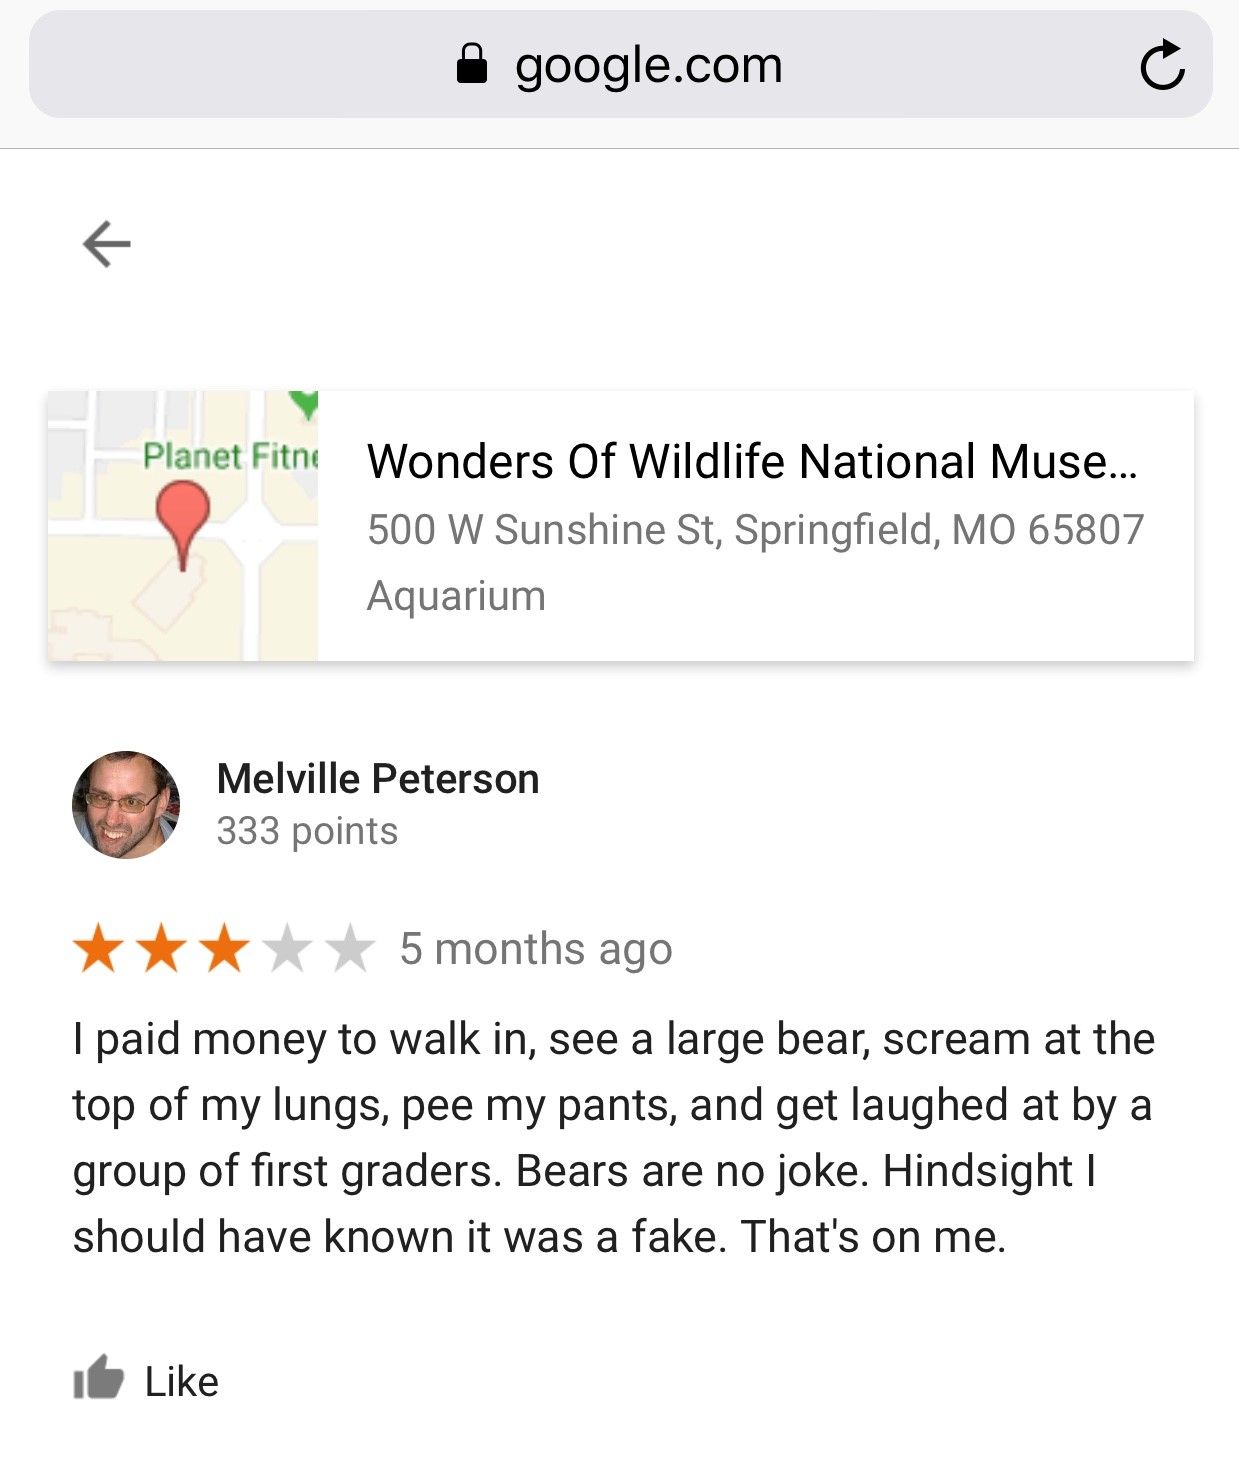 Found this review while browsing at work. Gave me a good laugh.